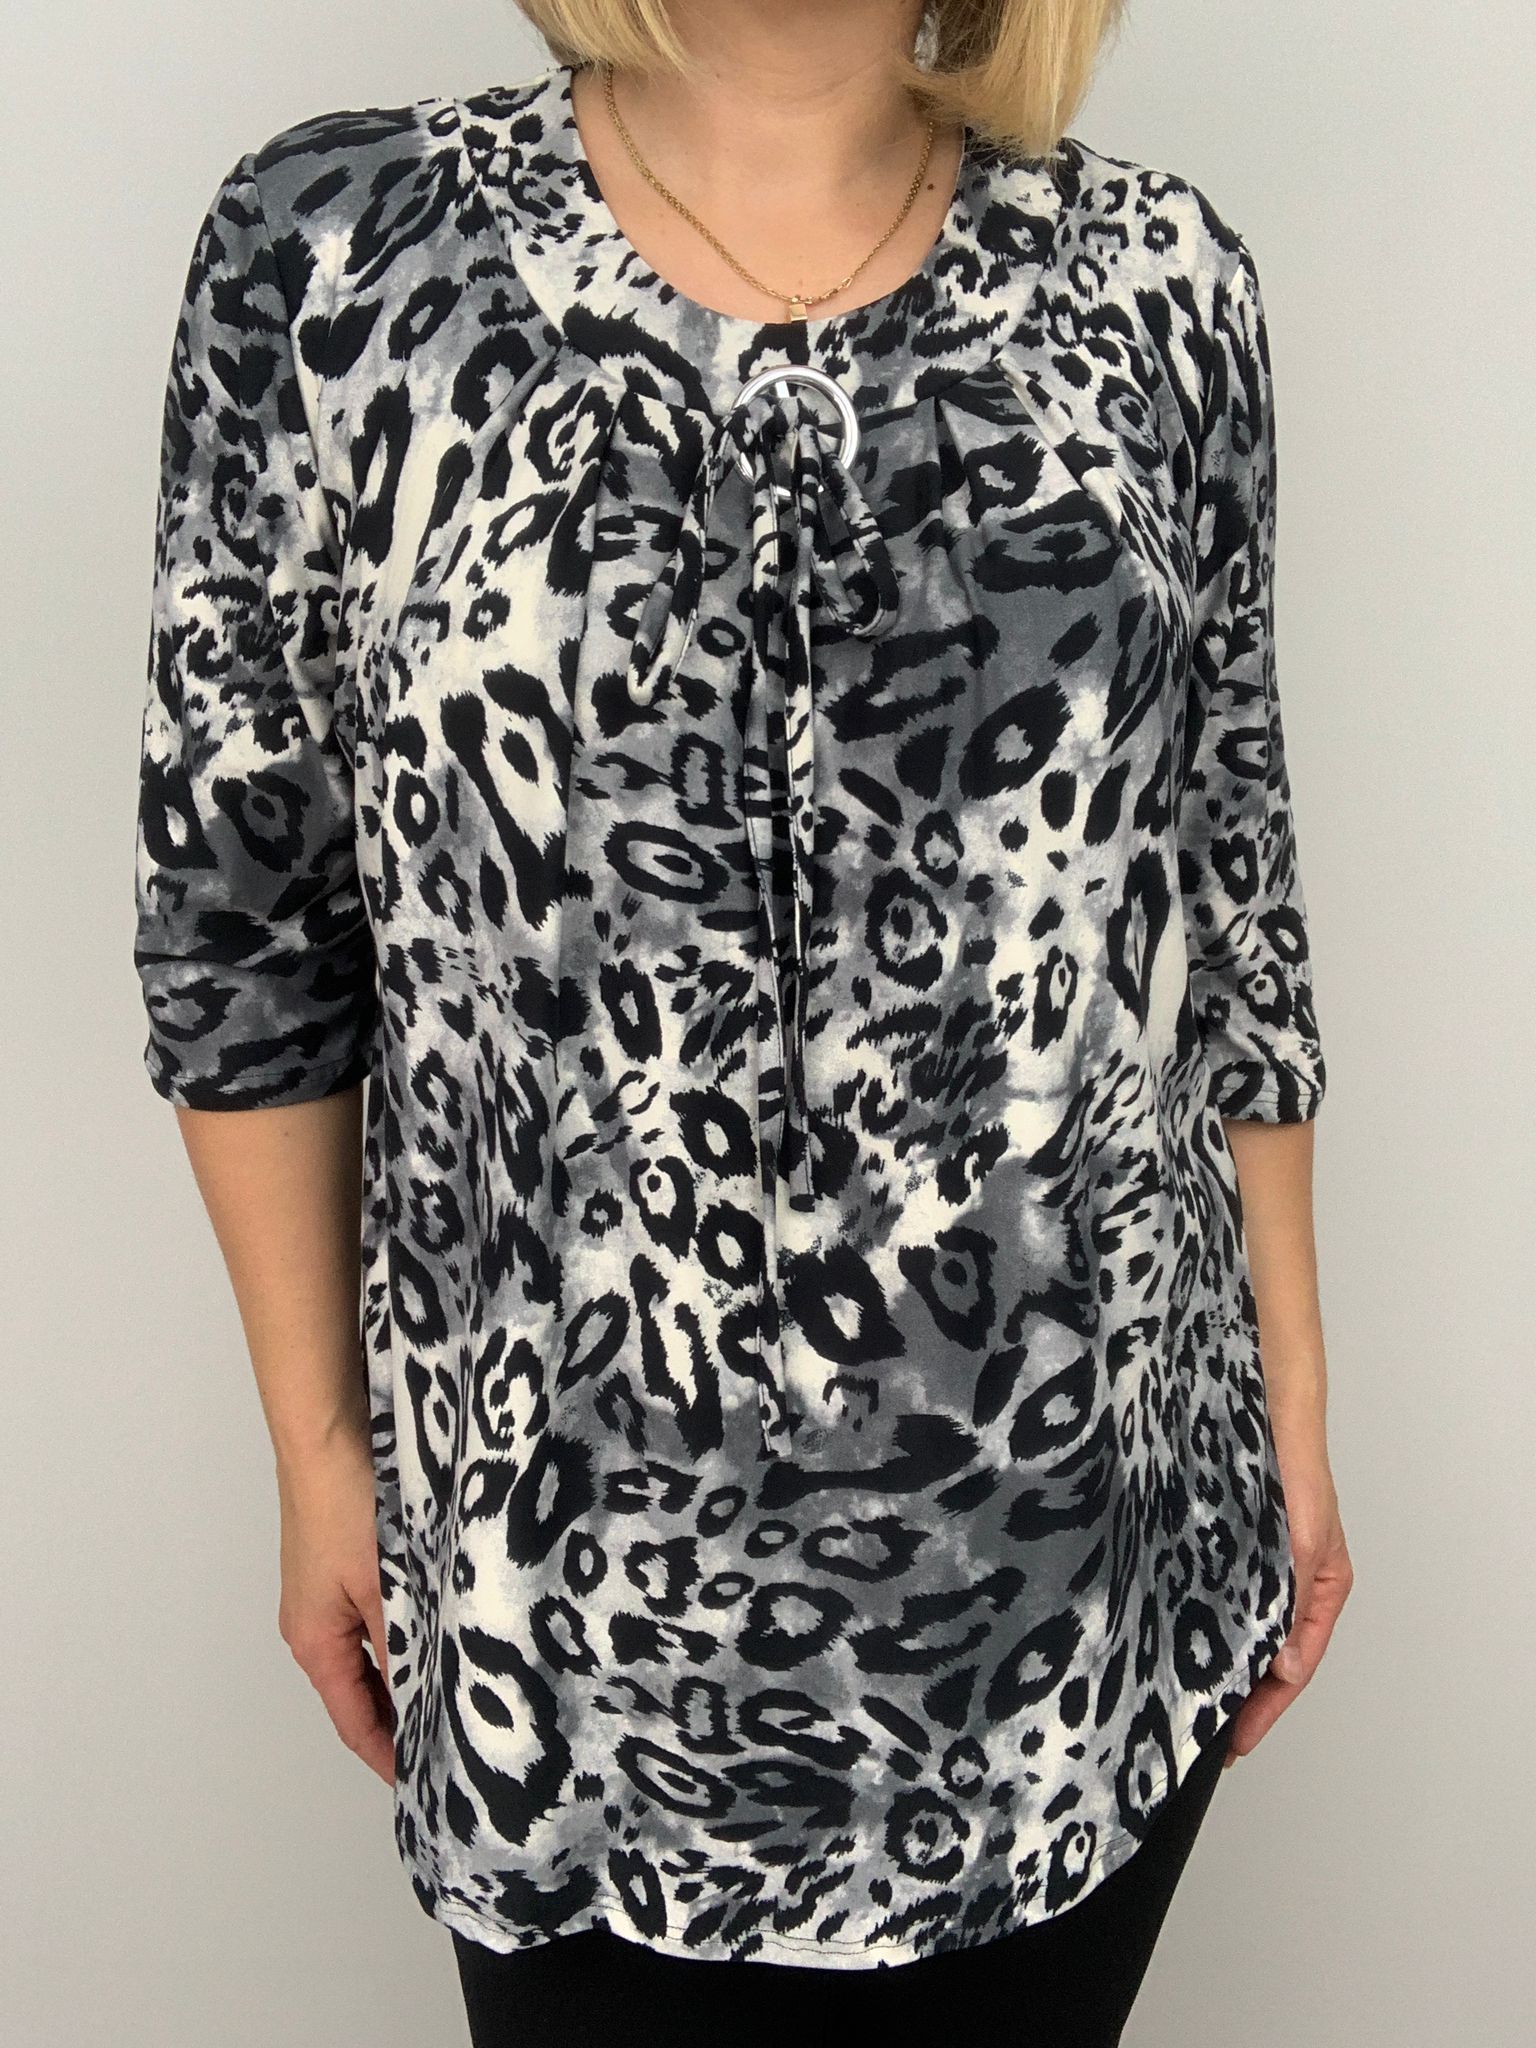 Style Direct Womens Round Neck Plus SIZE TOP LEOPARD PRINT